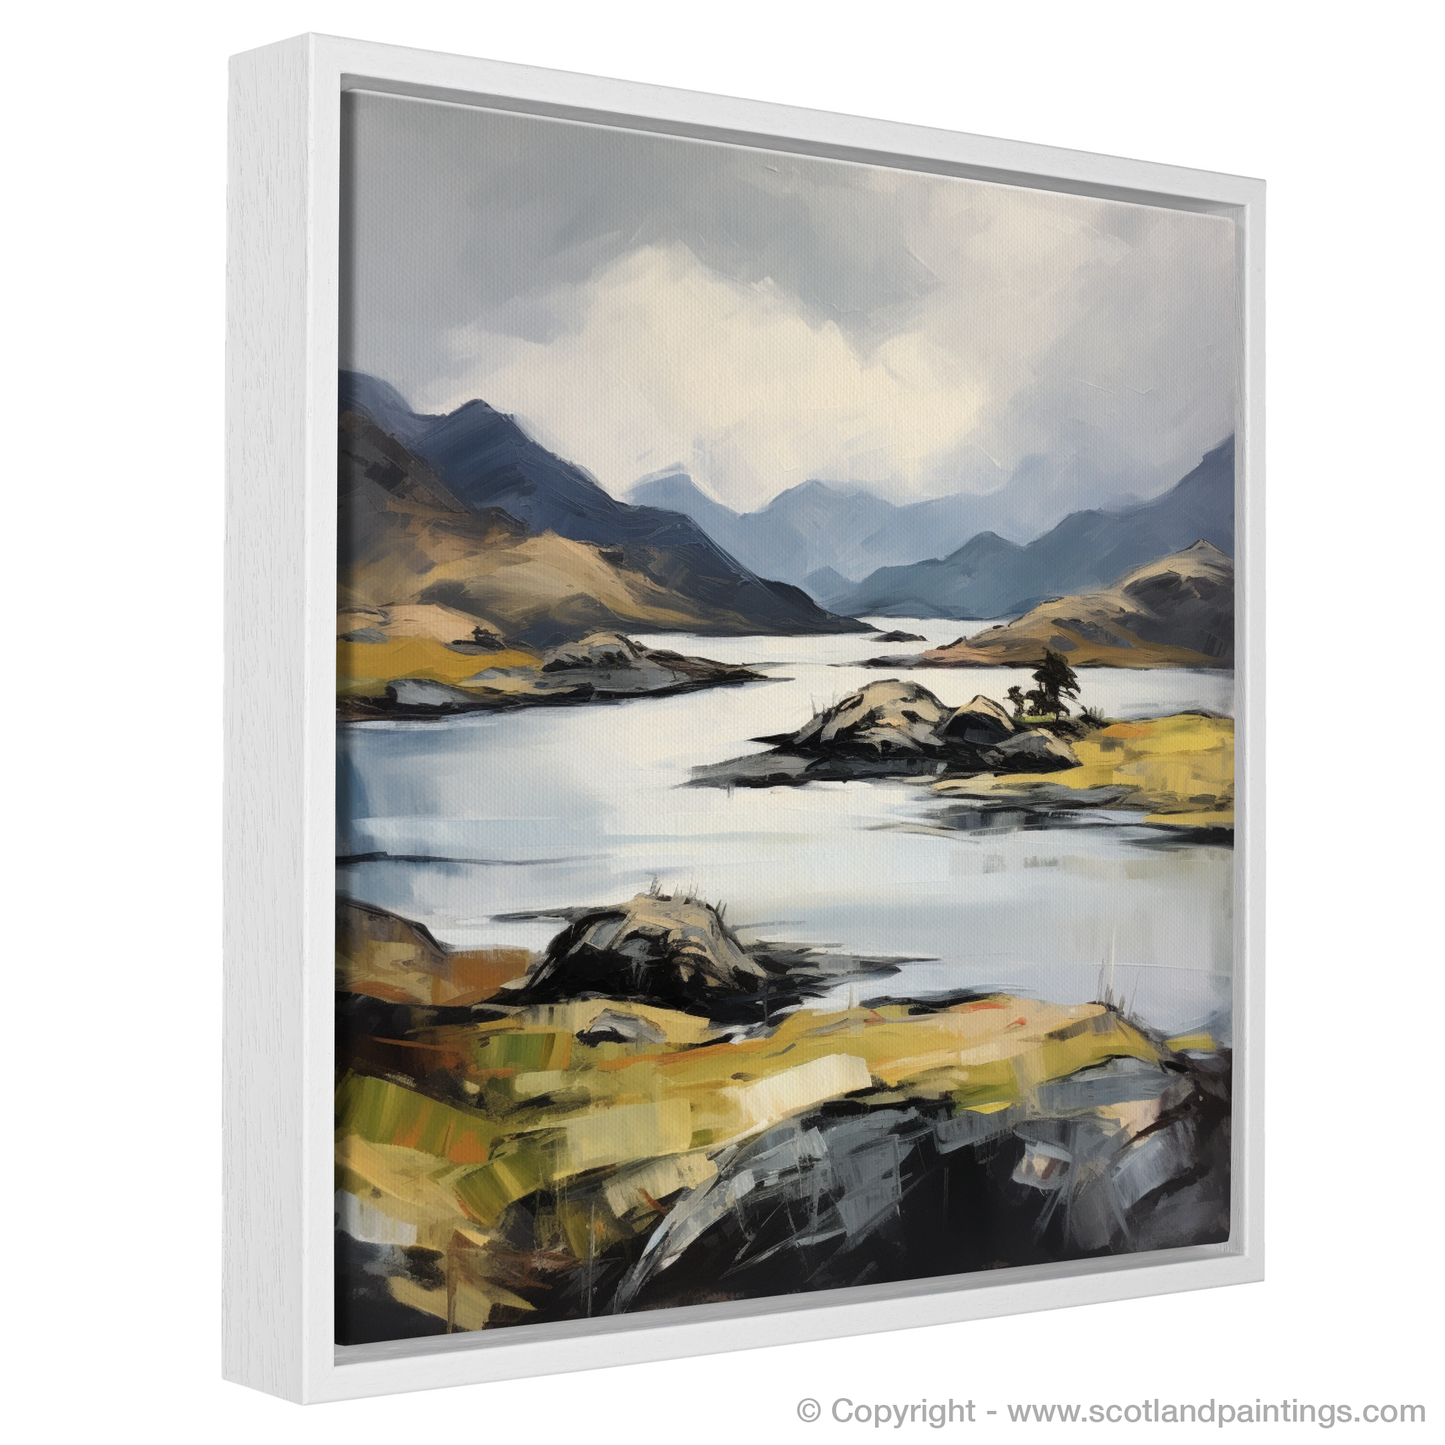 Painting and Art Print of Loch Morar, Highlands entitled "Expressionist Echoes of Loch Morar".